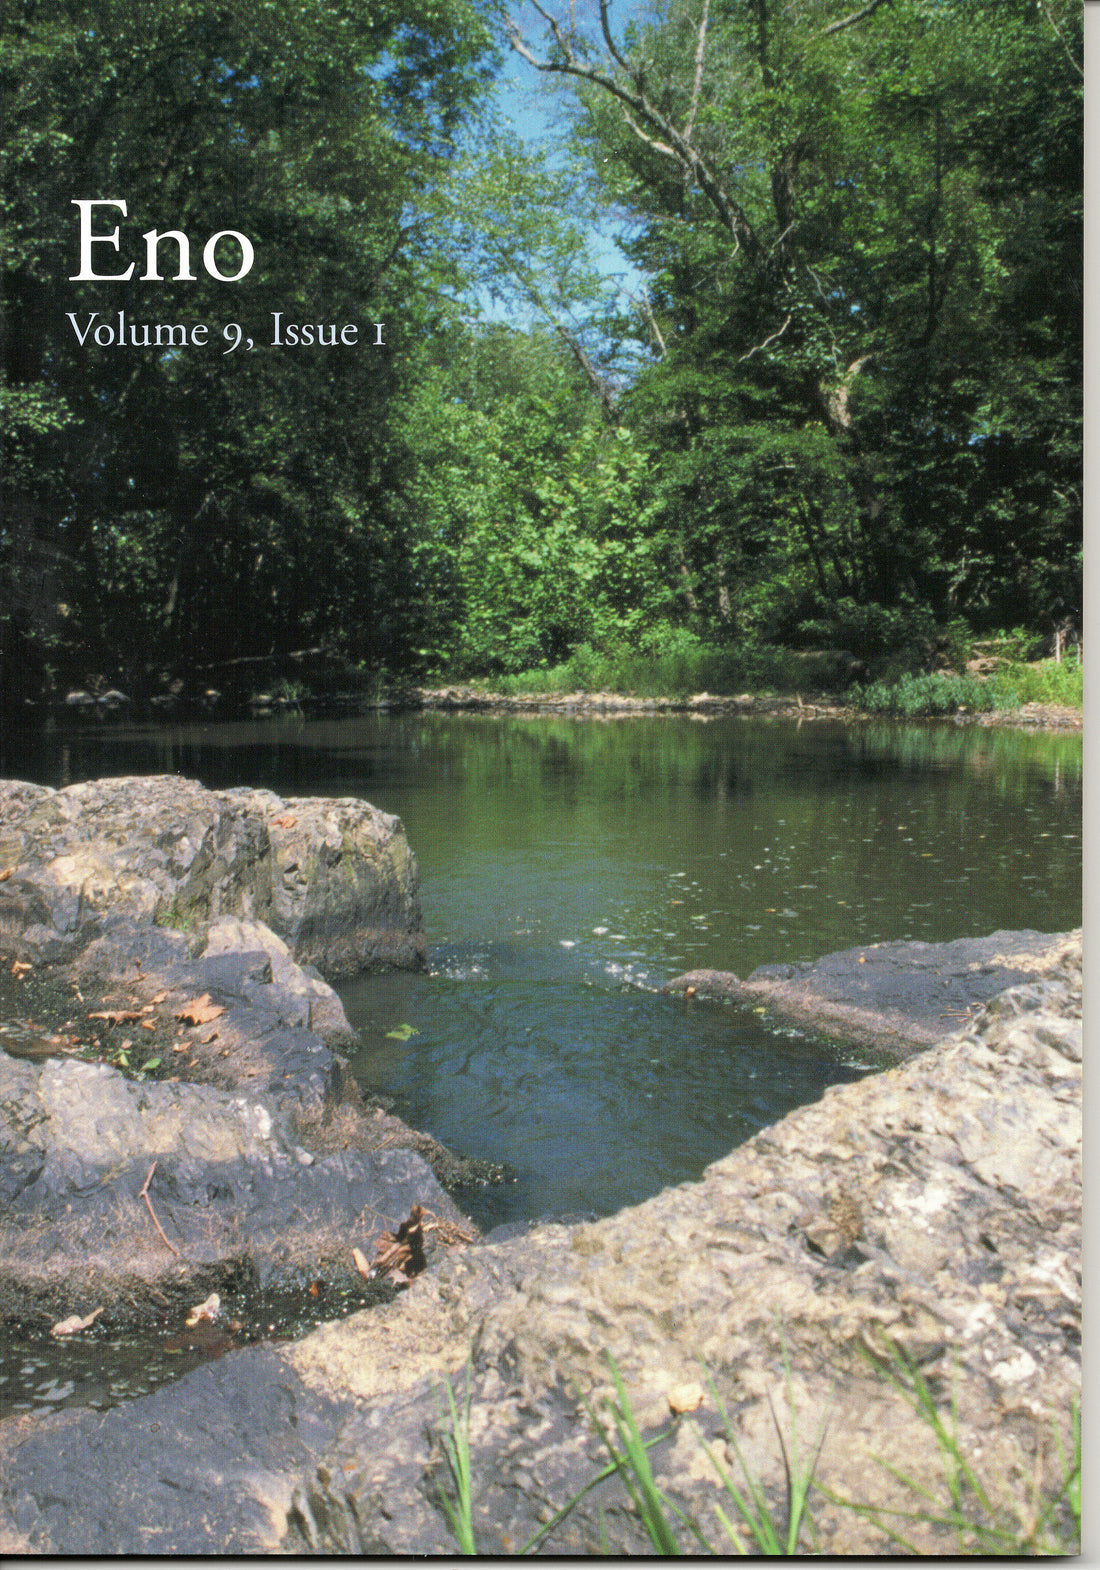 Eno Journal, Vol. 9, No. 2 - The Little River Issue